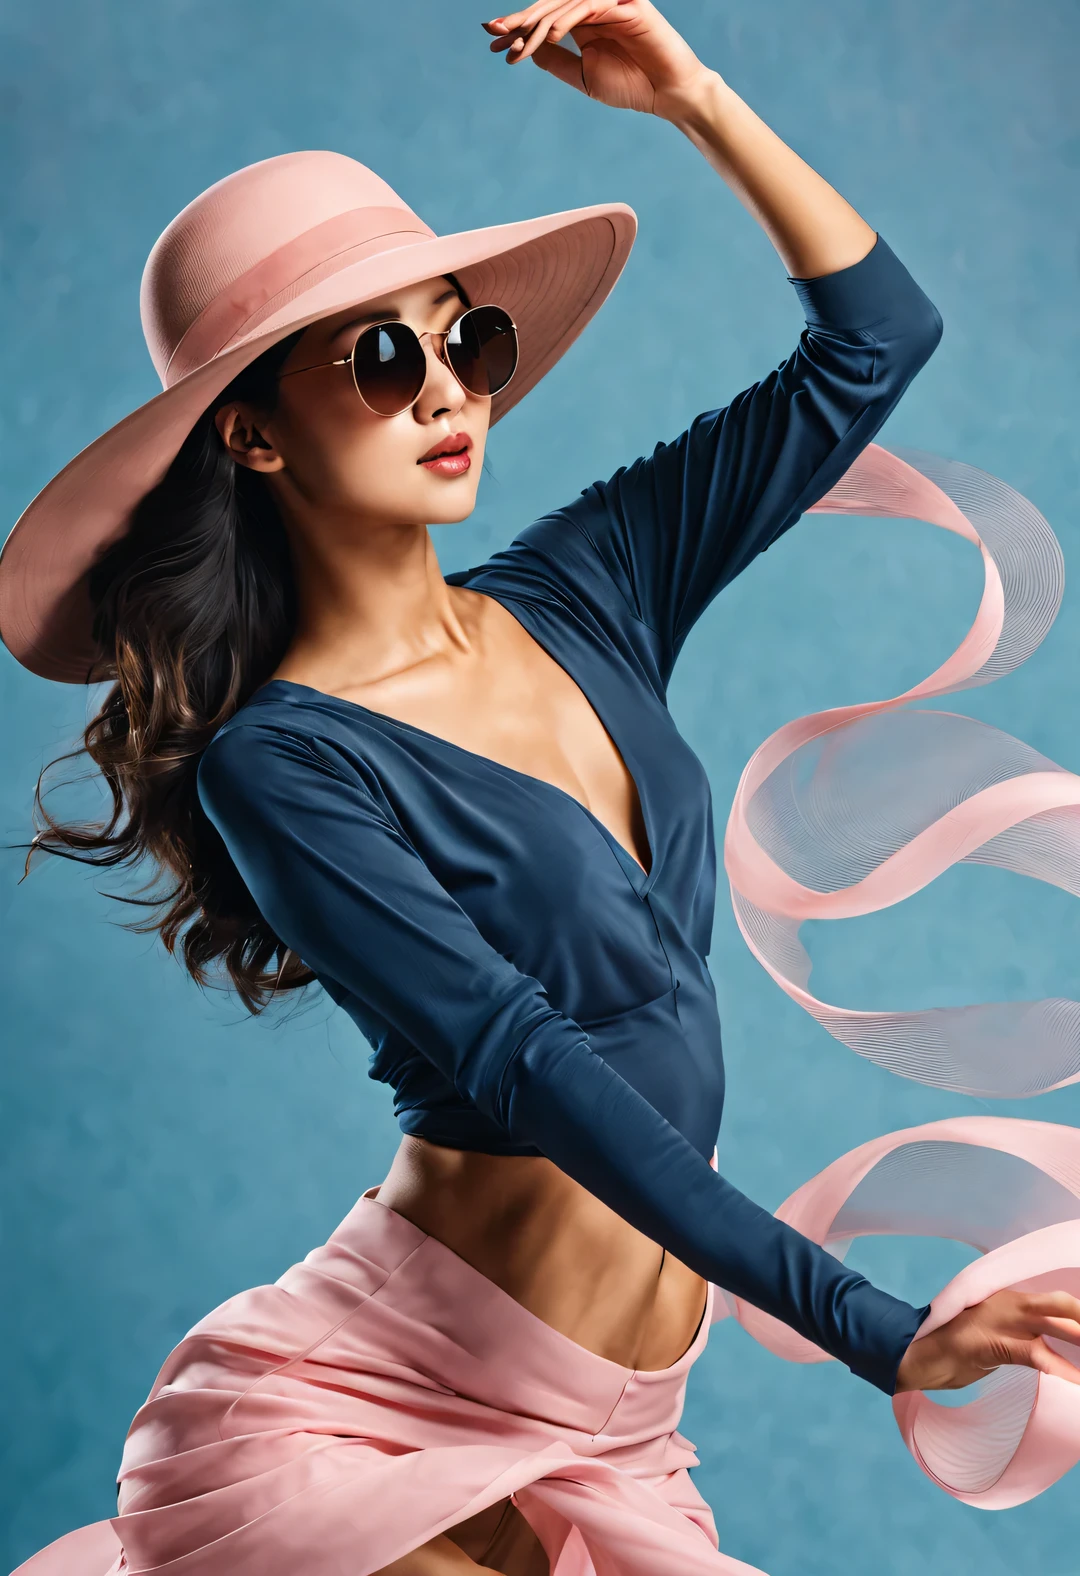 (Modern art dance simple poster design), (Half-length close-up), (Beautiful Chinese girl dancing in the air), (Wearing sunglasses and a hat: 1.2), (Soft pink contrasts with deep navy blue), Showing the warmth and depth of winter, Both fashionable and with a touch of gentle feminine charm. Wear modern and stylish winter fashion, slim waist, high nose bridge, Head up posture, sad yet beautiful, slim figure, Exquisite facial features, correct finger,
background: briefcase dance, fog illustration, ink painting, black hair, Princess curly long hair, Proud, Surrealism, contemporary art photography, action painting illustration, abstract expressionism, Pixar, depth of field, motion blur, backlight, Falling shadows, Vignetting, Elevation viewing angle, Sony FE General Manager, ultra high definition, masterpiece, Accuracy, textured skin, Super details, high detail, high quality, Award-winning, best quality, Level, 16k, Photographed from a bottom-up perspective,